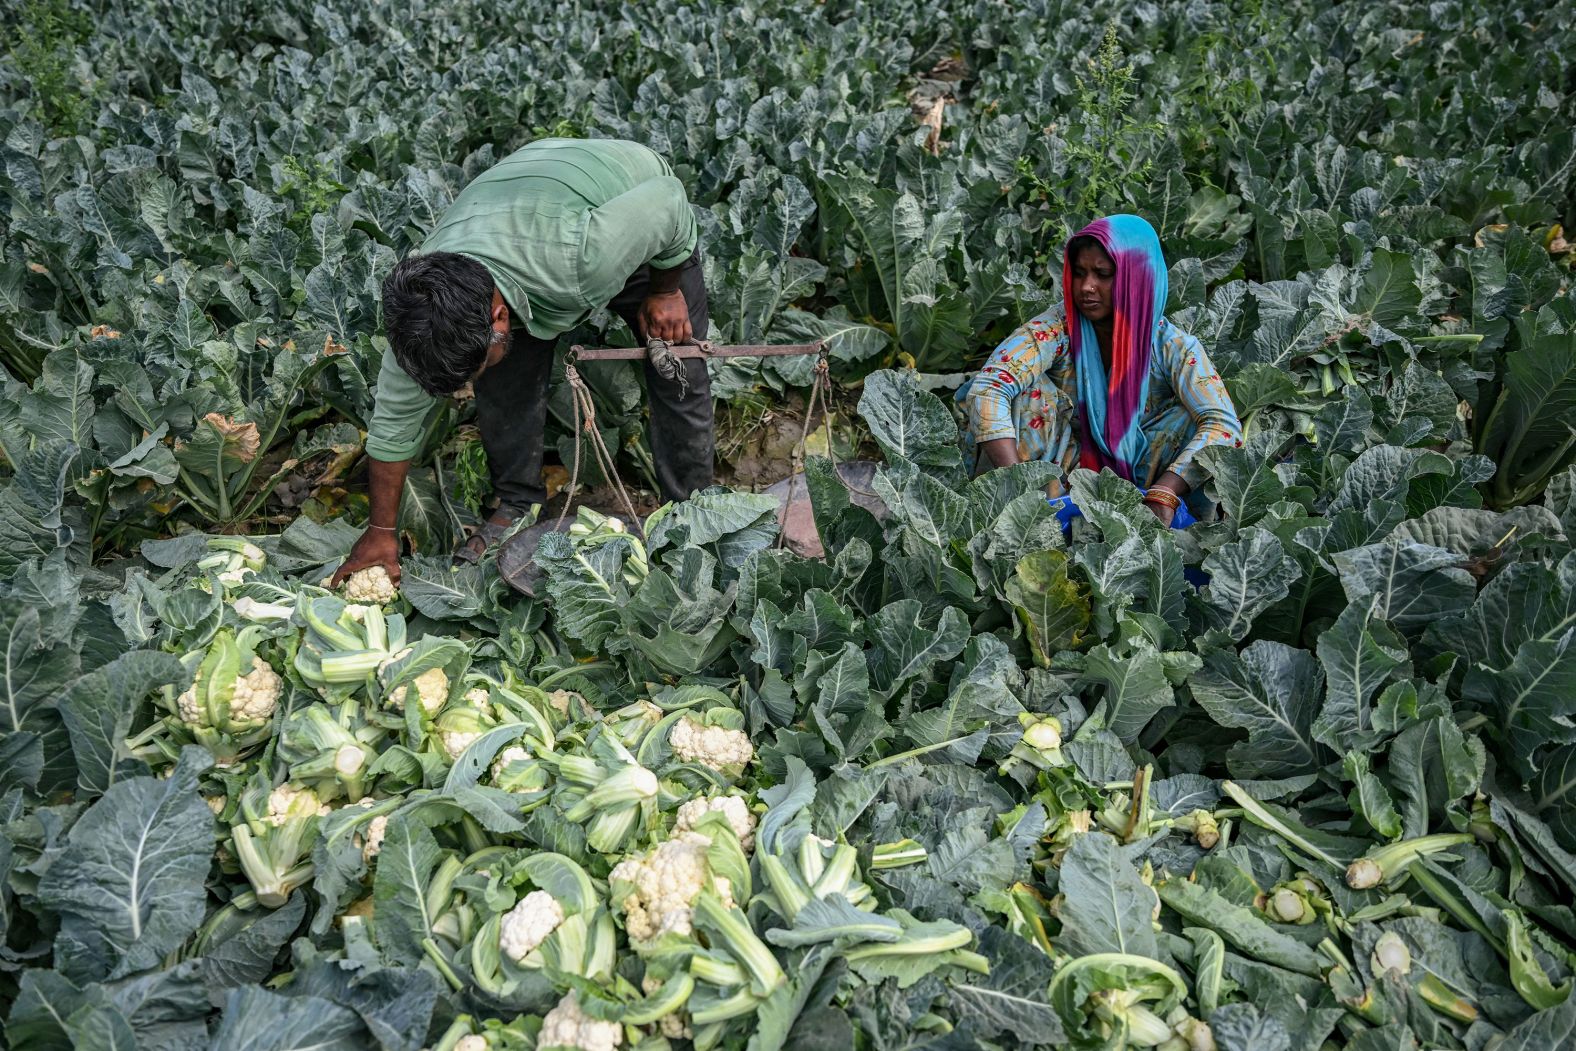 A farmer harvests cauliflower in a field in New Delhi on Wednesday, April 3.